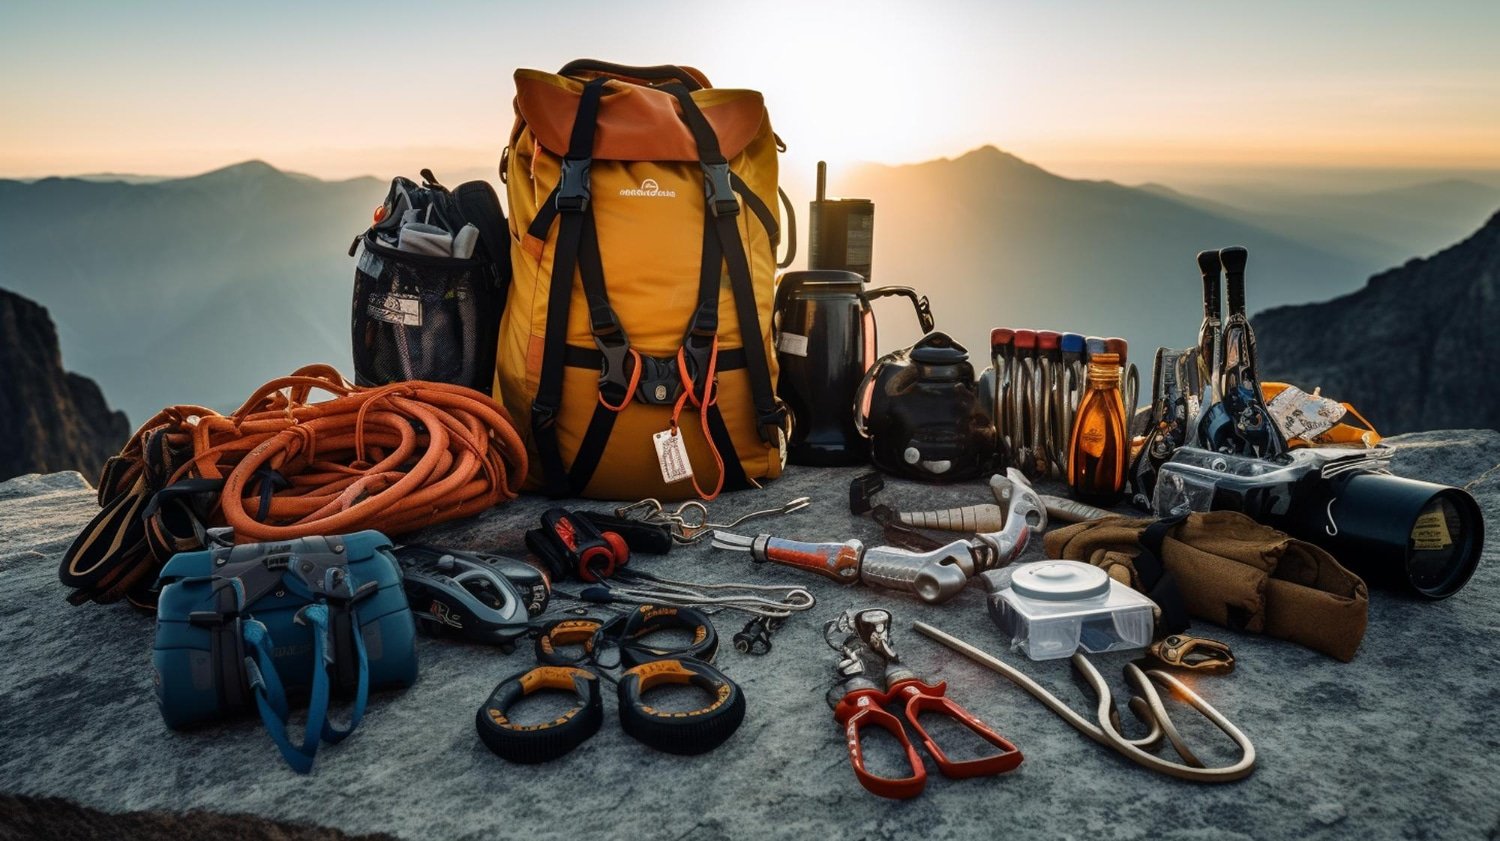 Adventure Outdoors With Hyperlite Mountain Gear’s Ultralight Backpacking Equipment